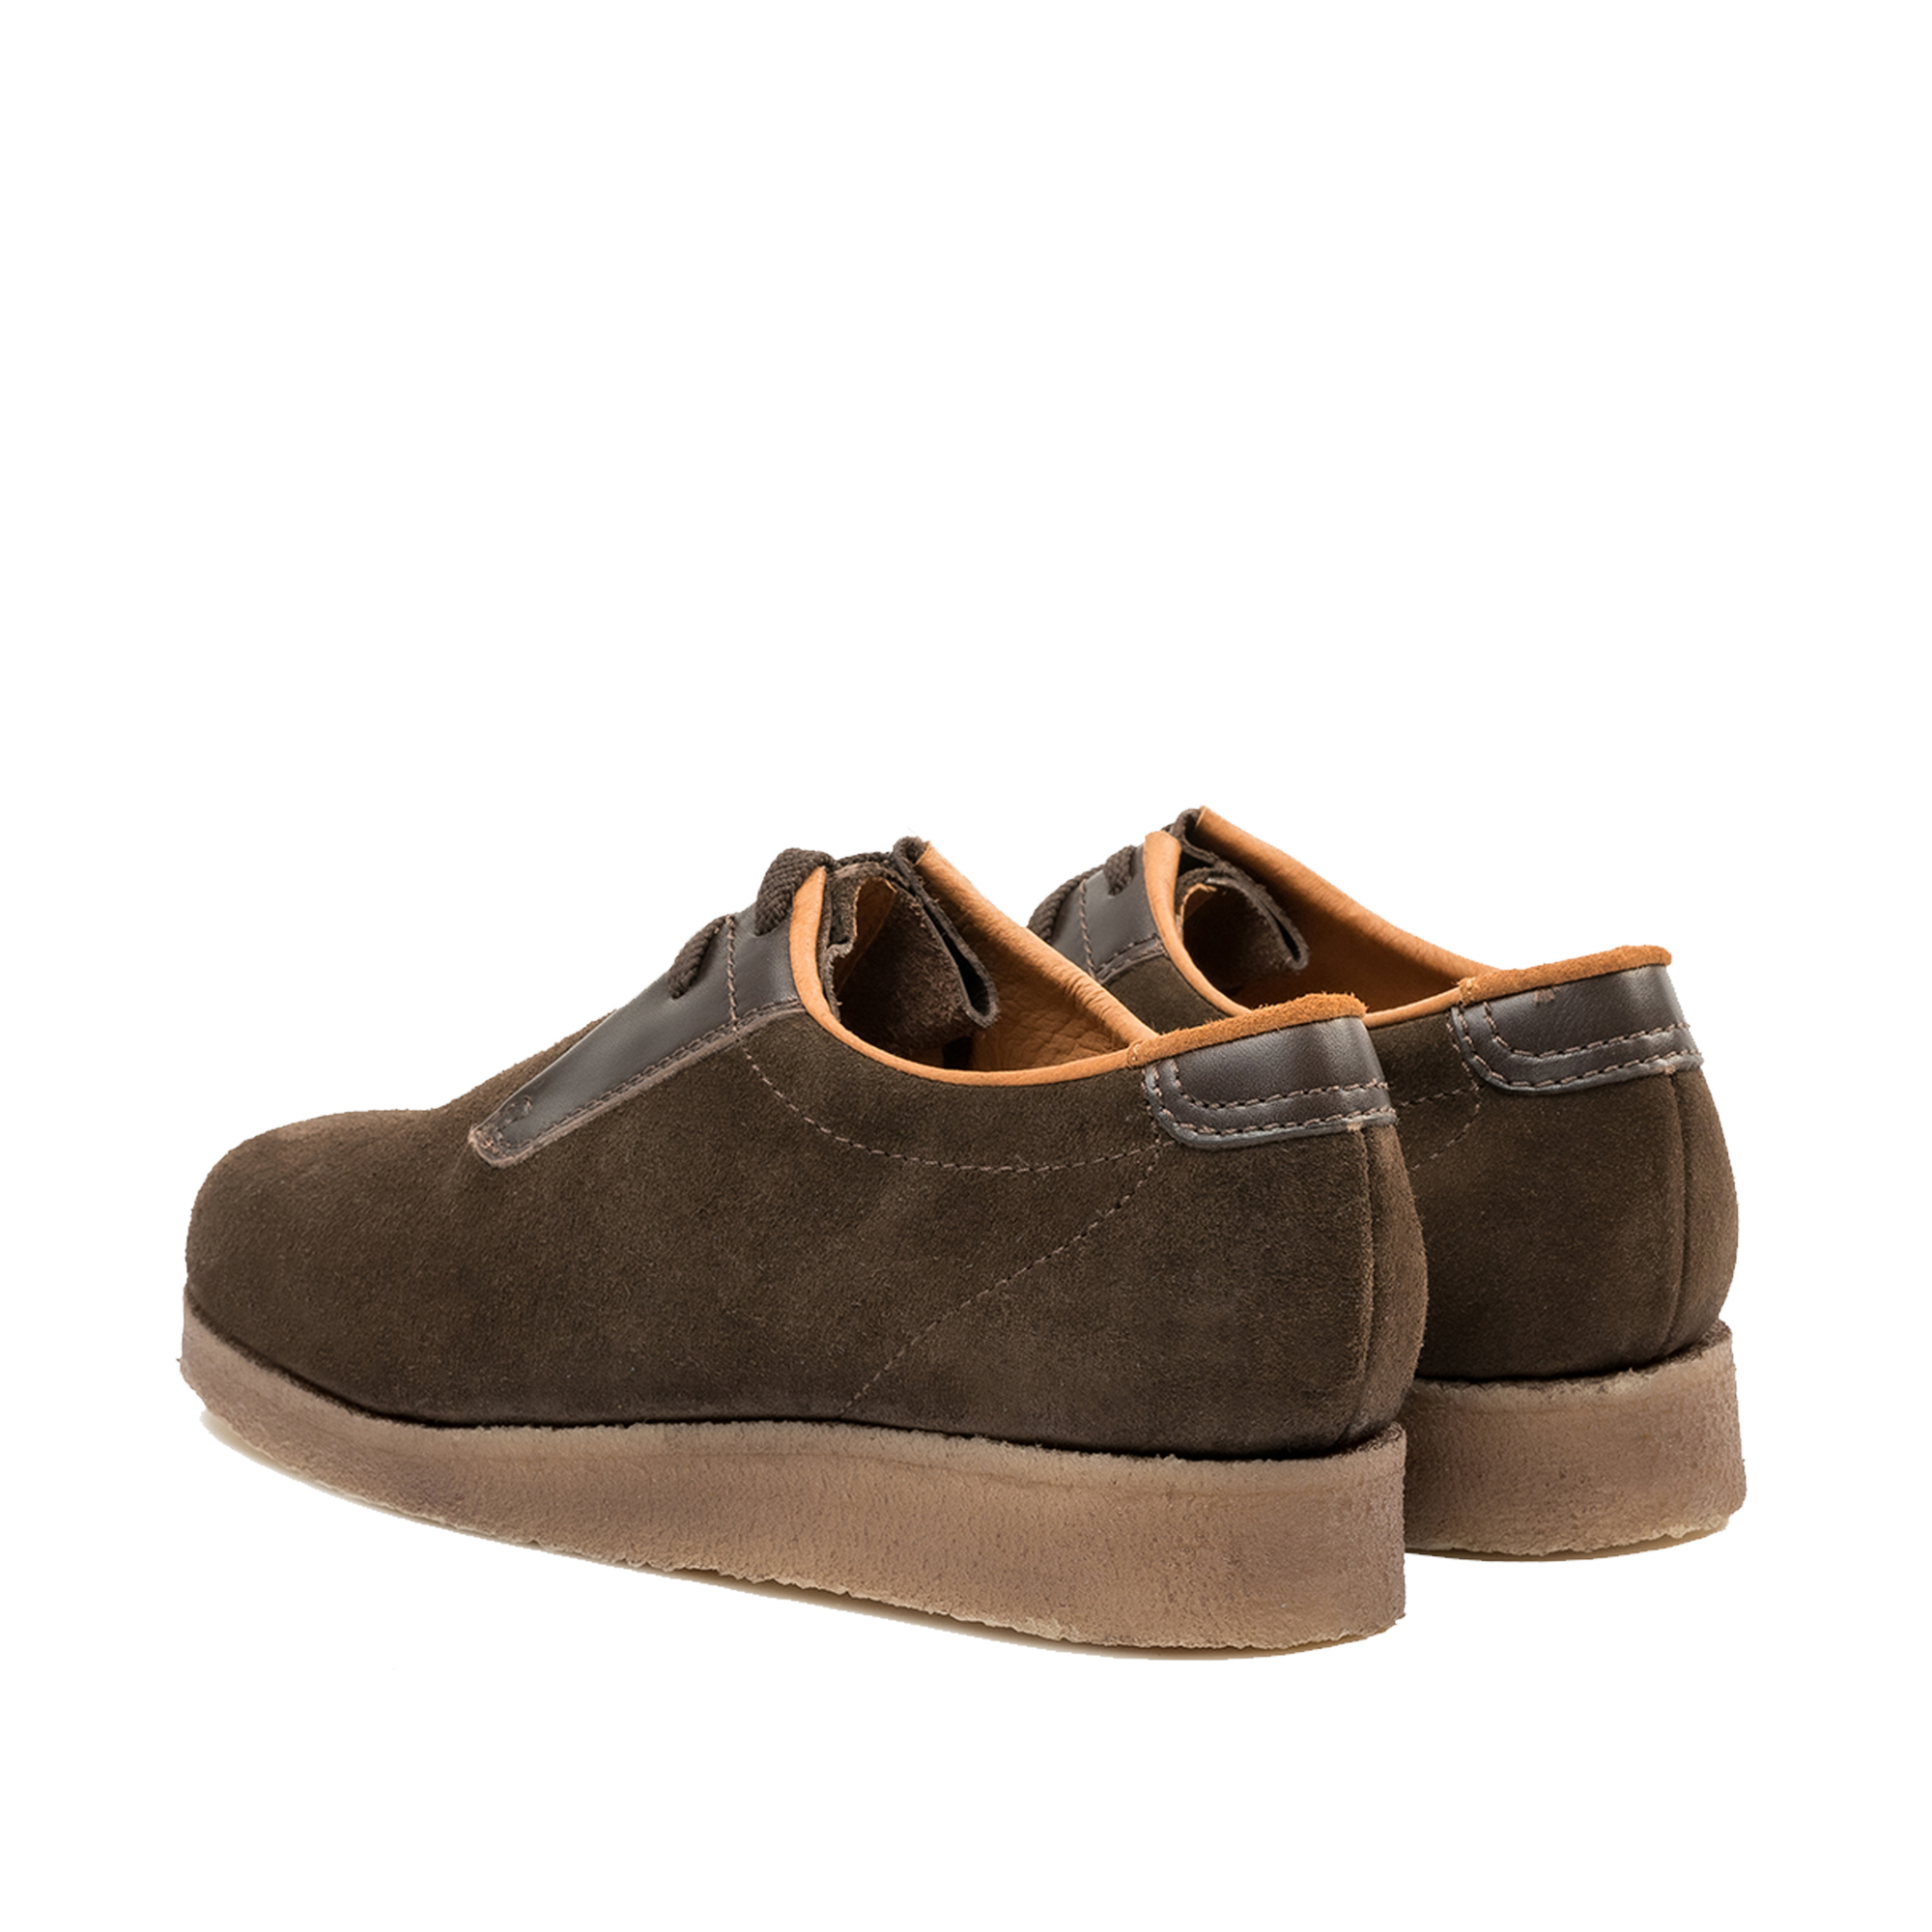 P500 Padmore & Barnes Original Sports Shoe – Brown Suede with Leather ...